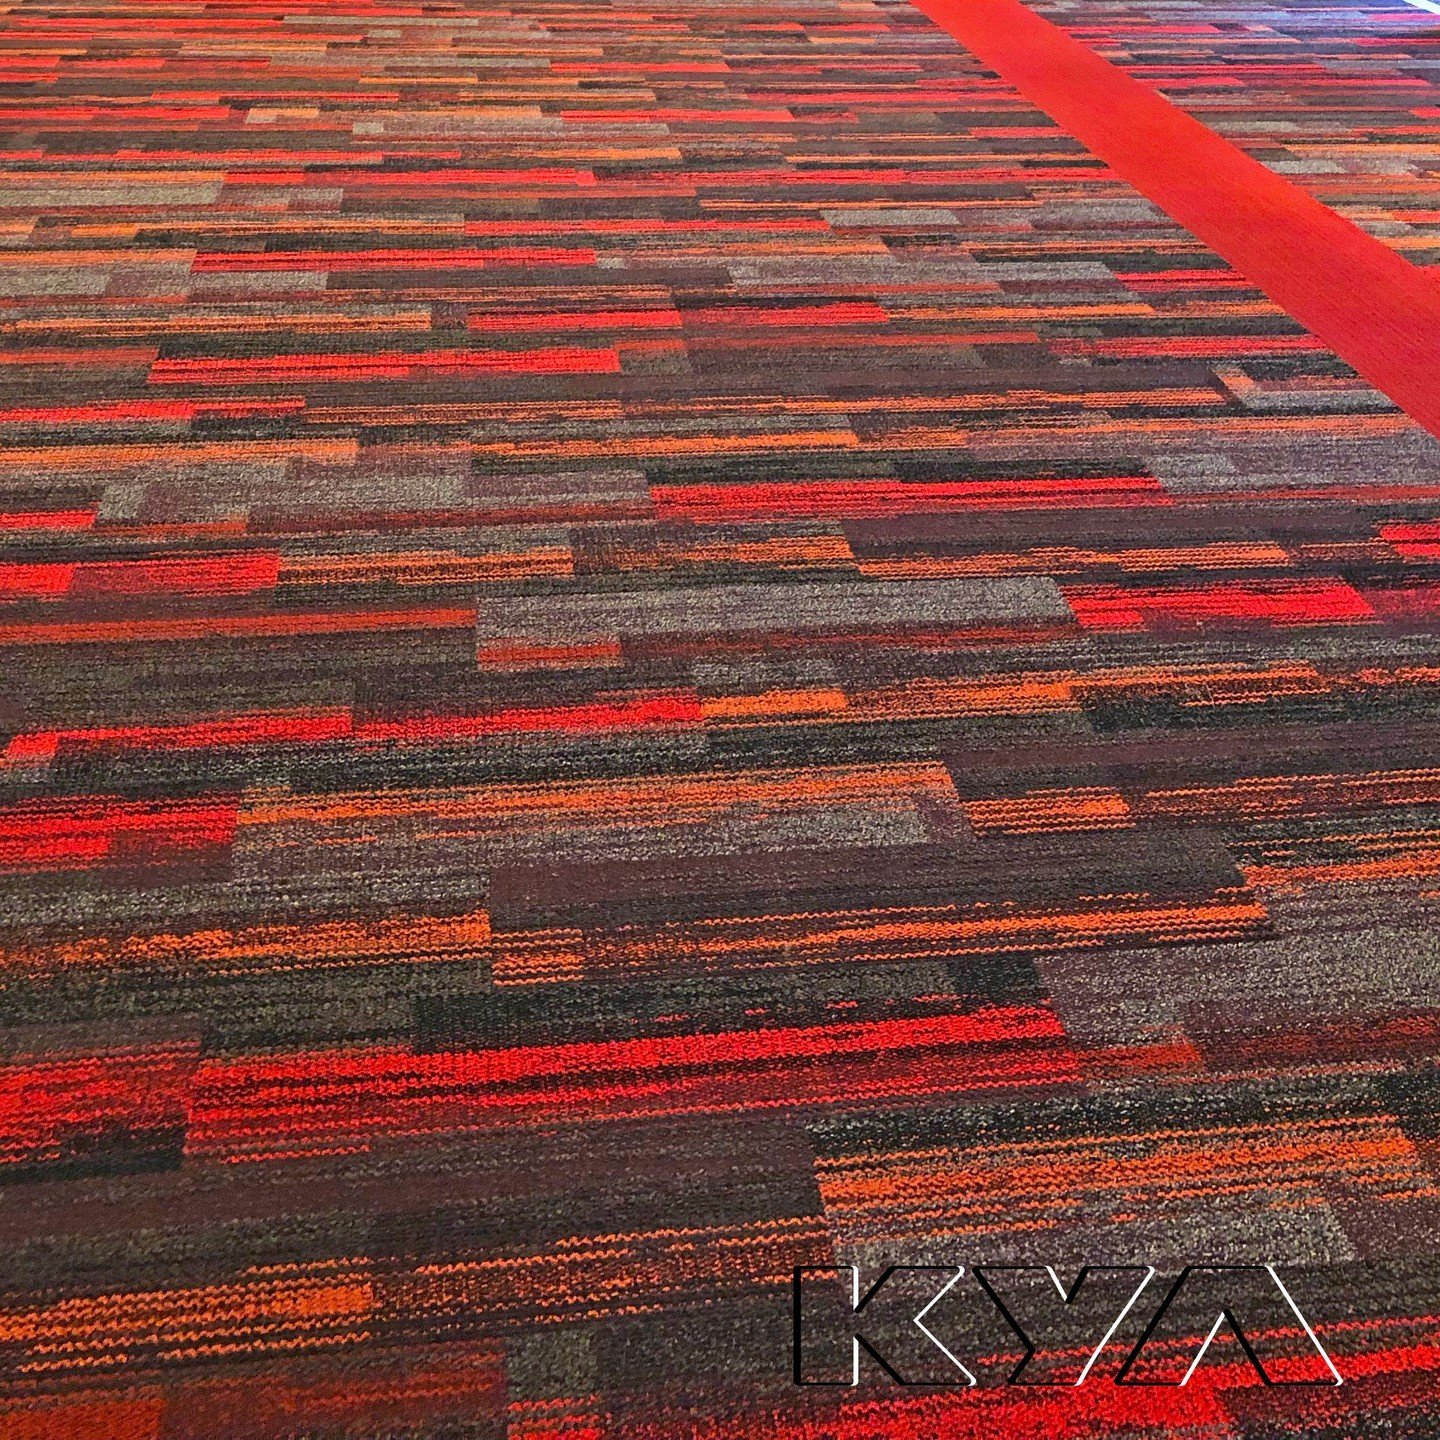 Diablo Valley College needed to redo the carpet in its performing arts center. The new carpet helped keep the lobby quiet and peaceful when classes and other events were happening in all the rooms. What other benefits of carpet do you like? #carpet #